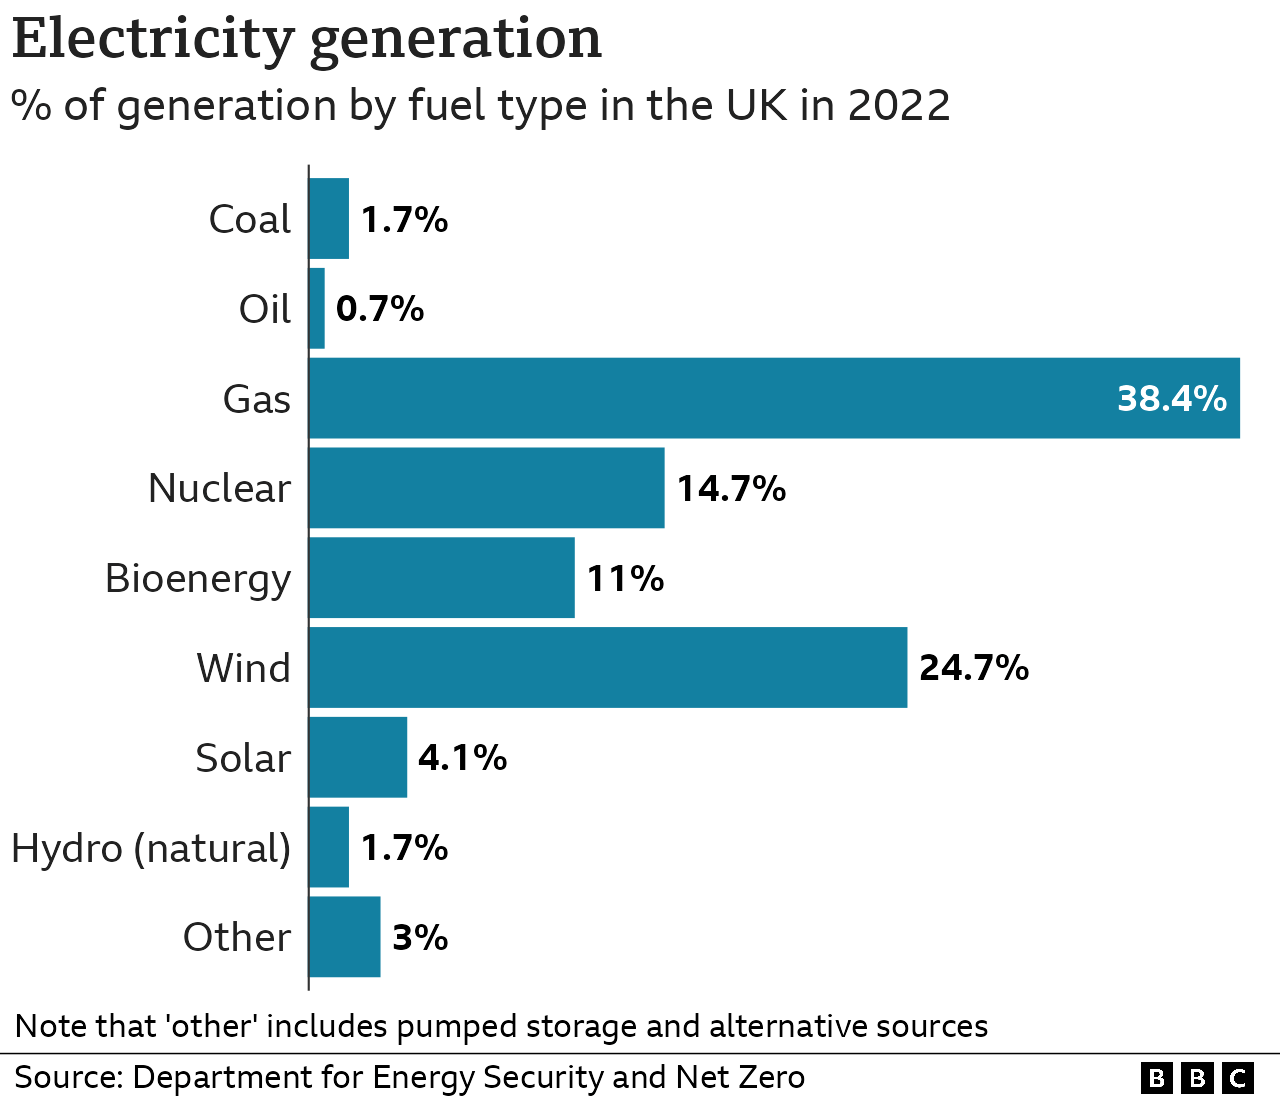 Breakdown of electricity used in the UK by fuel type in 2022: coal 1.7%; oil 0.7%; gas 38.4%, nuclear 14.7%, bioenergy 11.0%, wind 24.7%, solar 4.1%, natural hydropower 1.7%, other 3.0%. Note that "other" includes pumped storage and alternative sources. Source: Department for Energy Security and Net Zero. [August 2023]